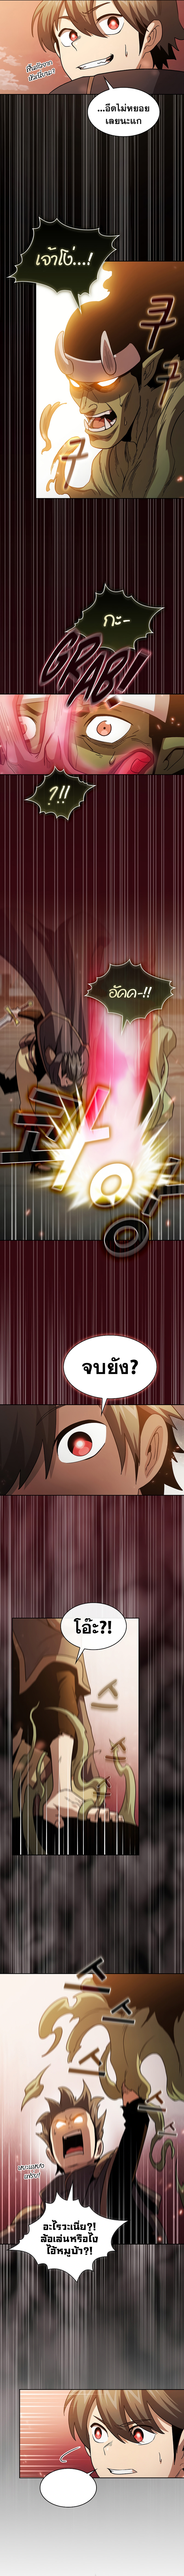 Is This Hero for Real! à¸à¸­à¸à¸à¸µà¹43 (3)